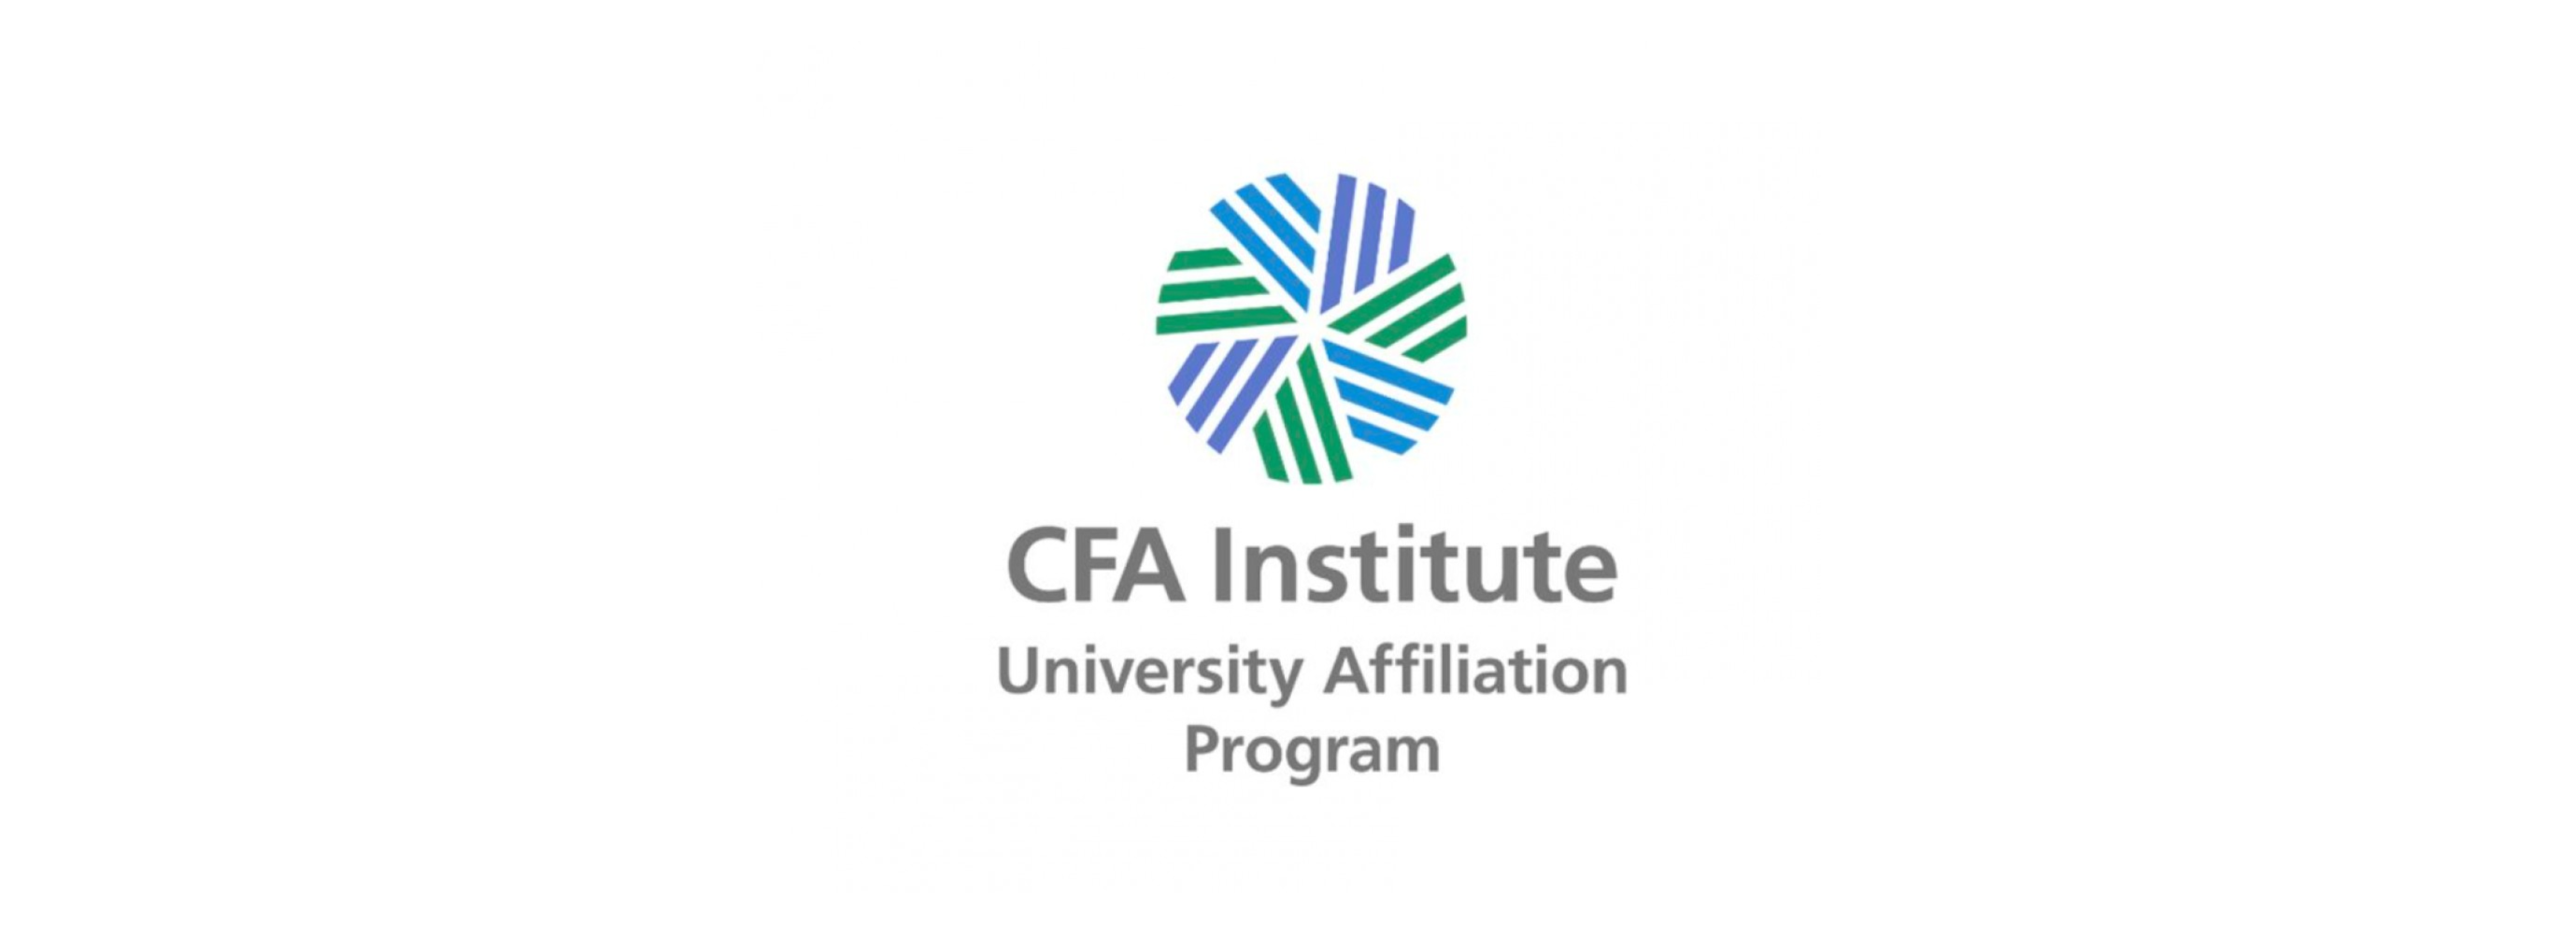 The Master in Finance at UC3M has received recognition from the prestigious CFA Institute